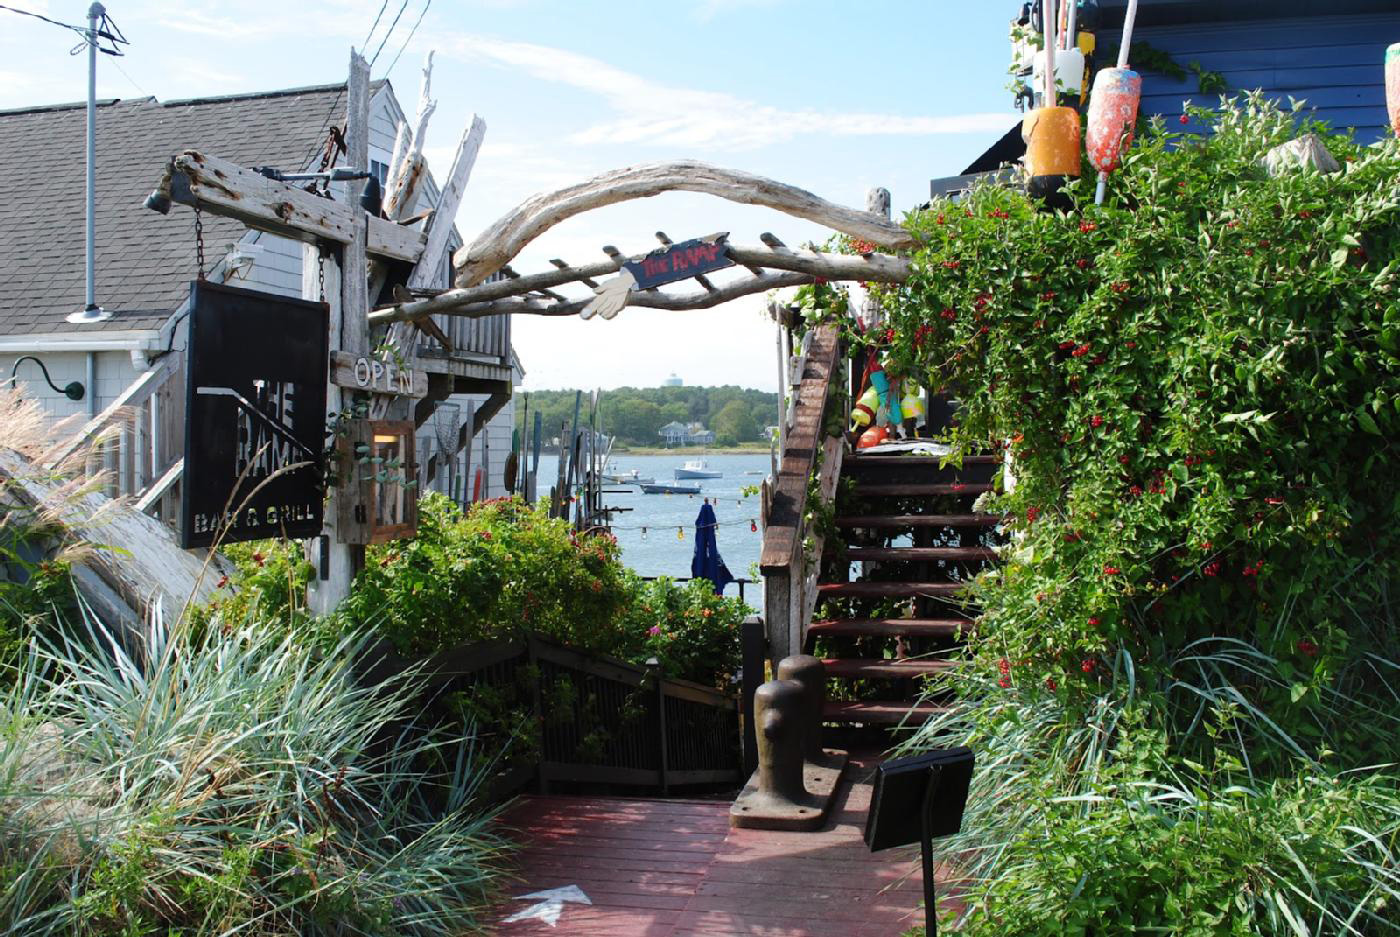                             Pier 77 Restaurant / The Ramp Bar &amp; Grill offers sweeping views of Cape Porpoise Harbor, both from its upstairs dining room and the waterfront patio below